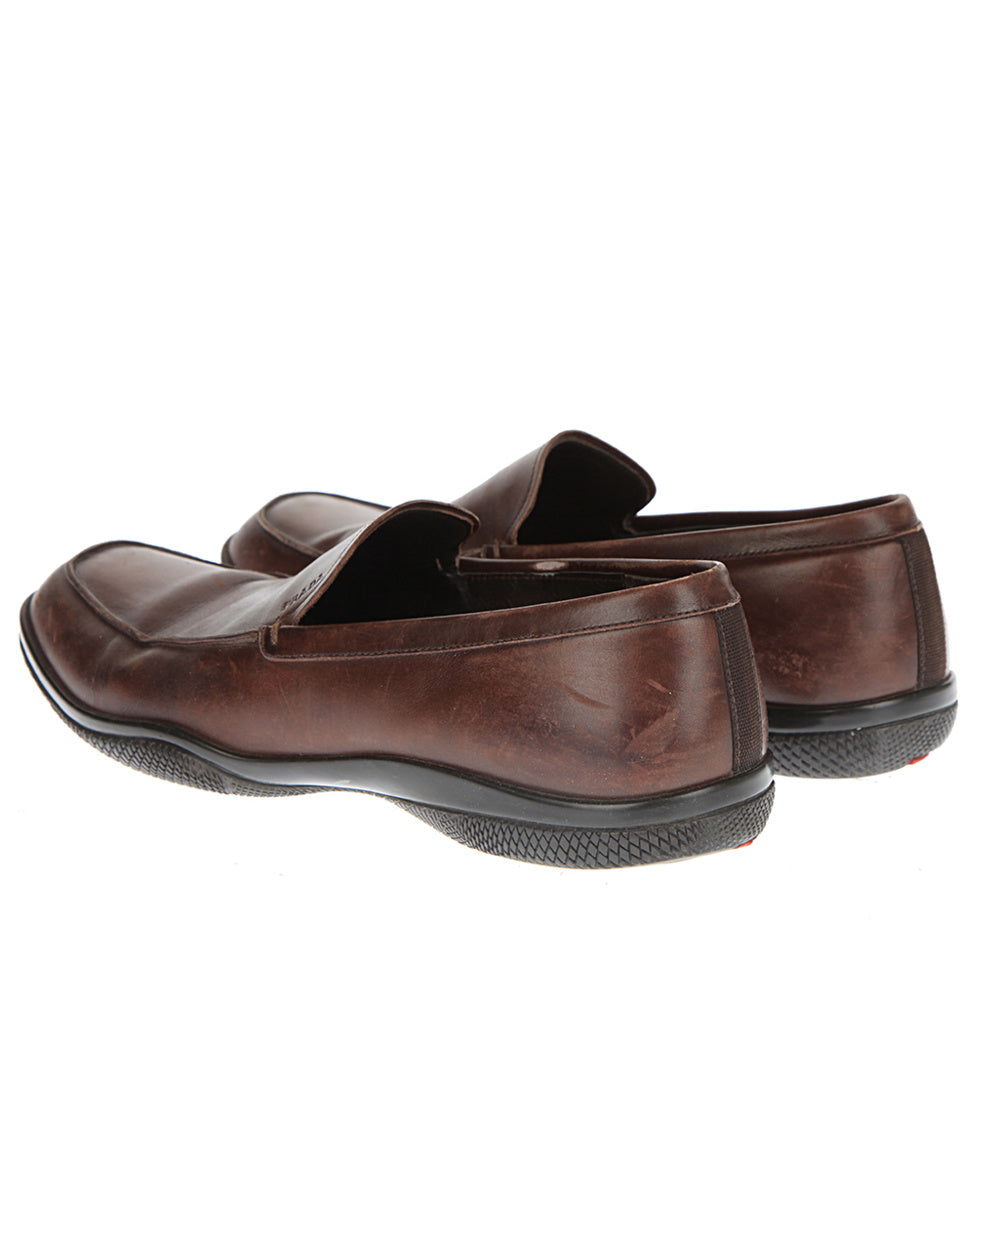 Prada Brown Leather Loafers - UK 5